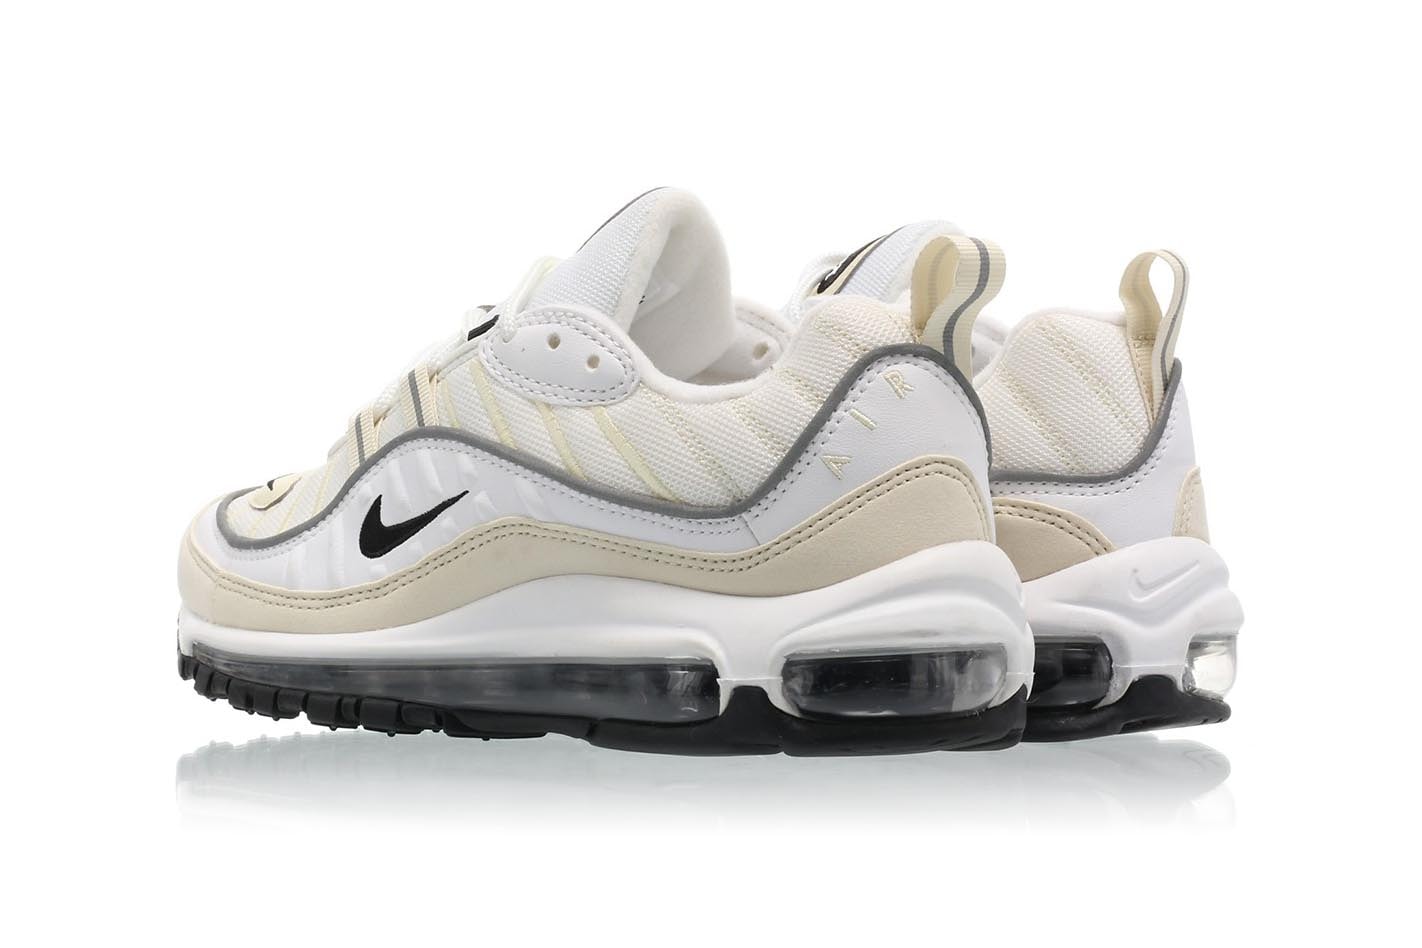 nike womens air max 98 white black fossil reflect silver cream off-white yellow beige minimal retro sneakers where to buy